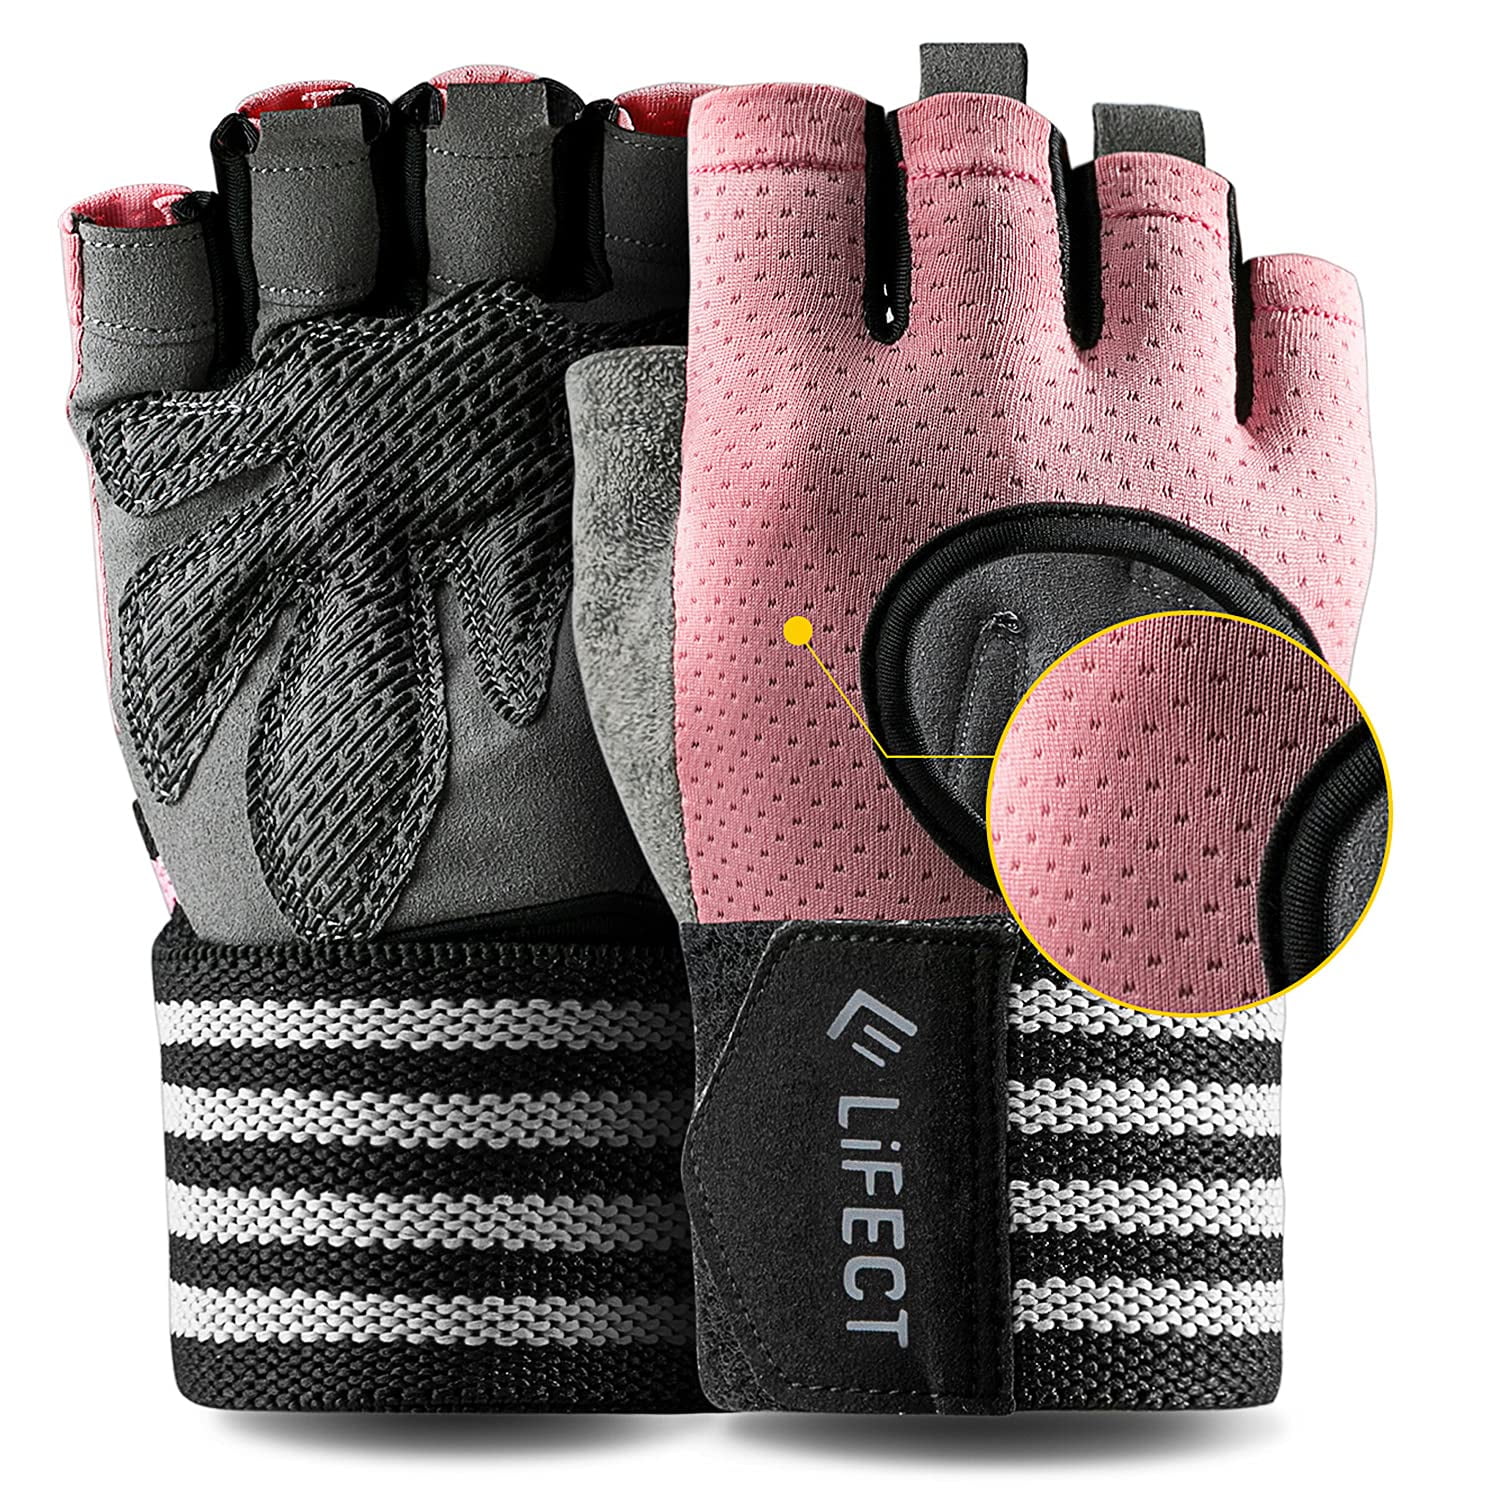 Workout Gloves LIFECT Gym Gloves for Men Women Anti-Slip Fingerless Weight Lifting Gloves with Wrist Support for Weightlifting Training Fitness Hanging Pull ups Full Palm Protection & Wrist Protection 